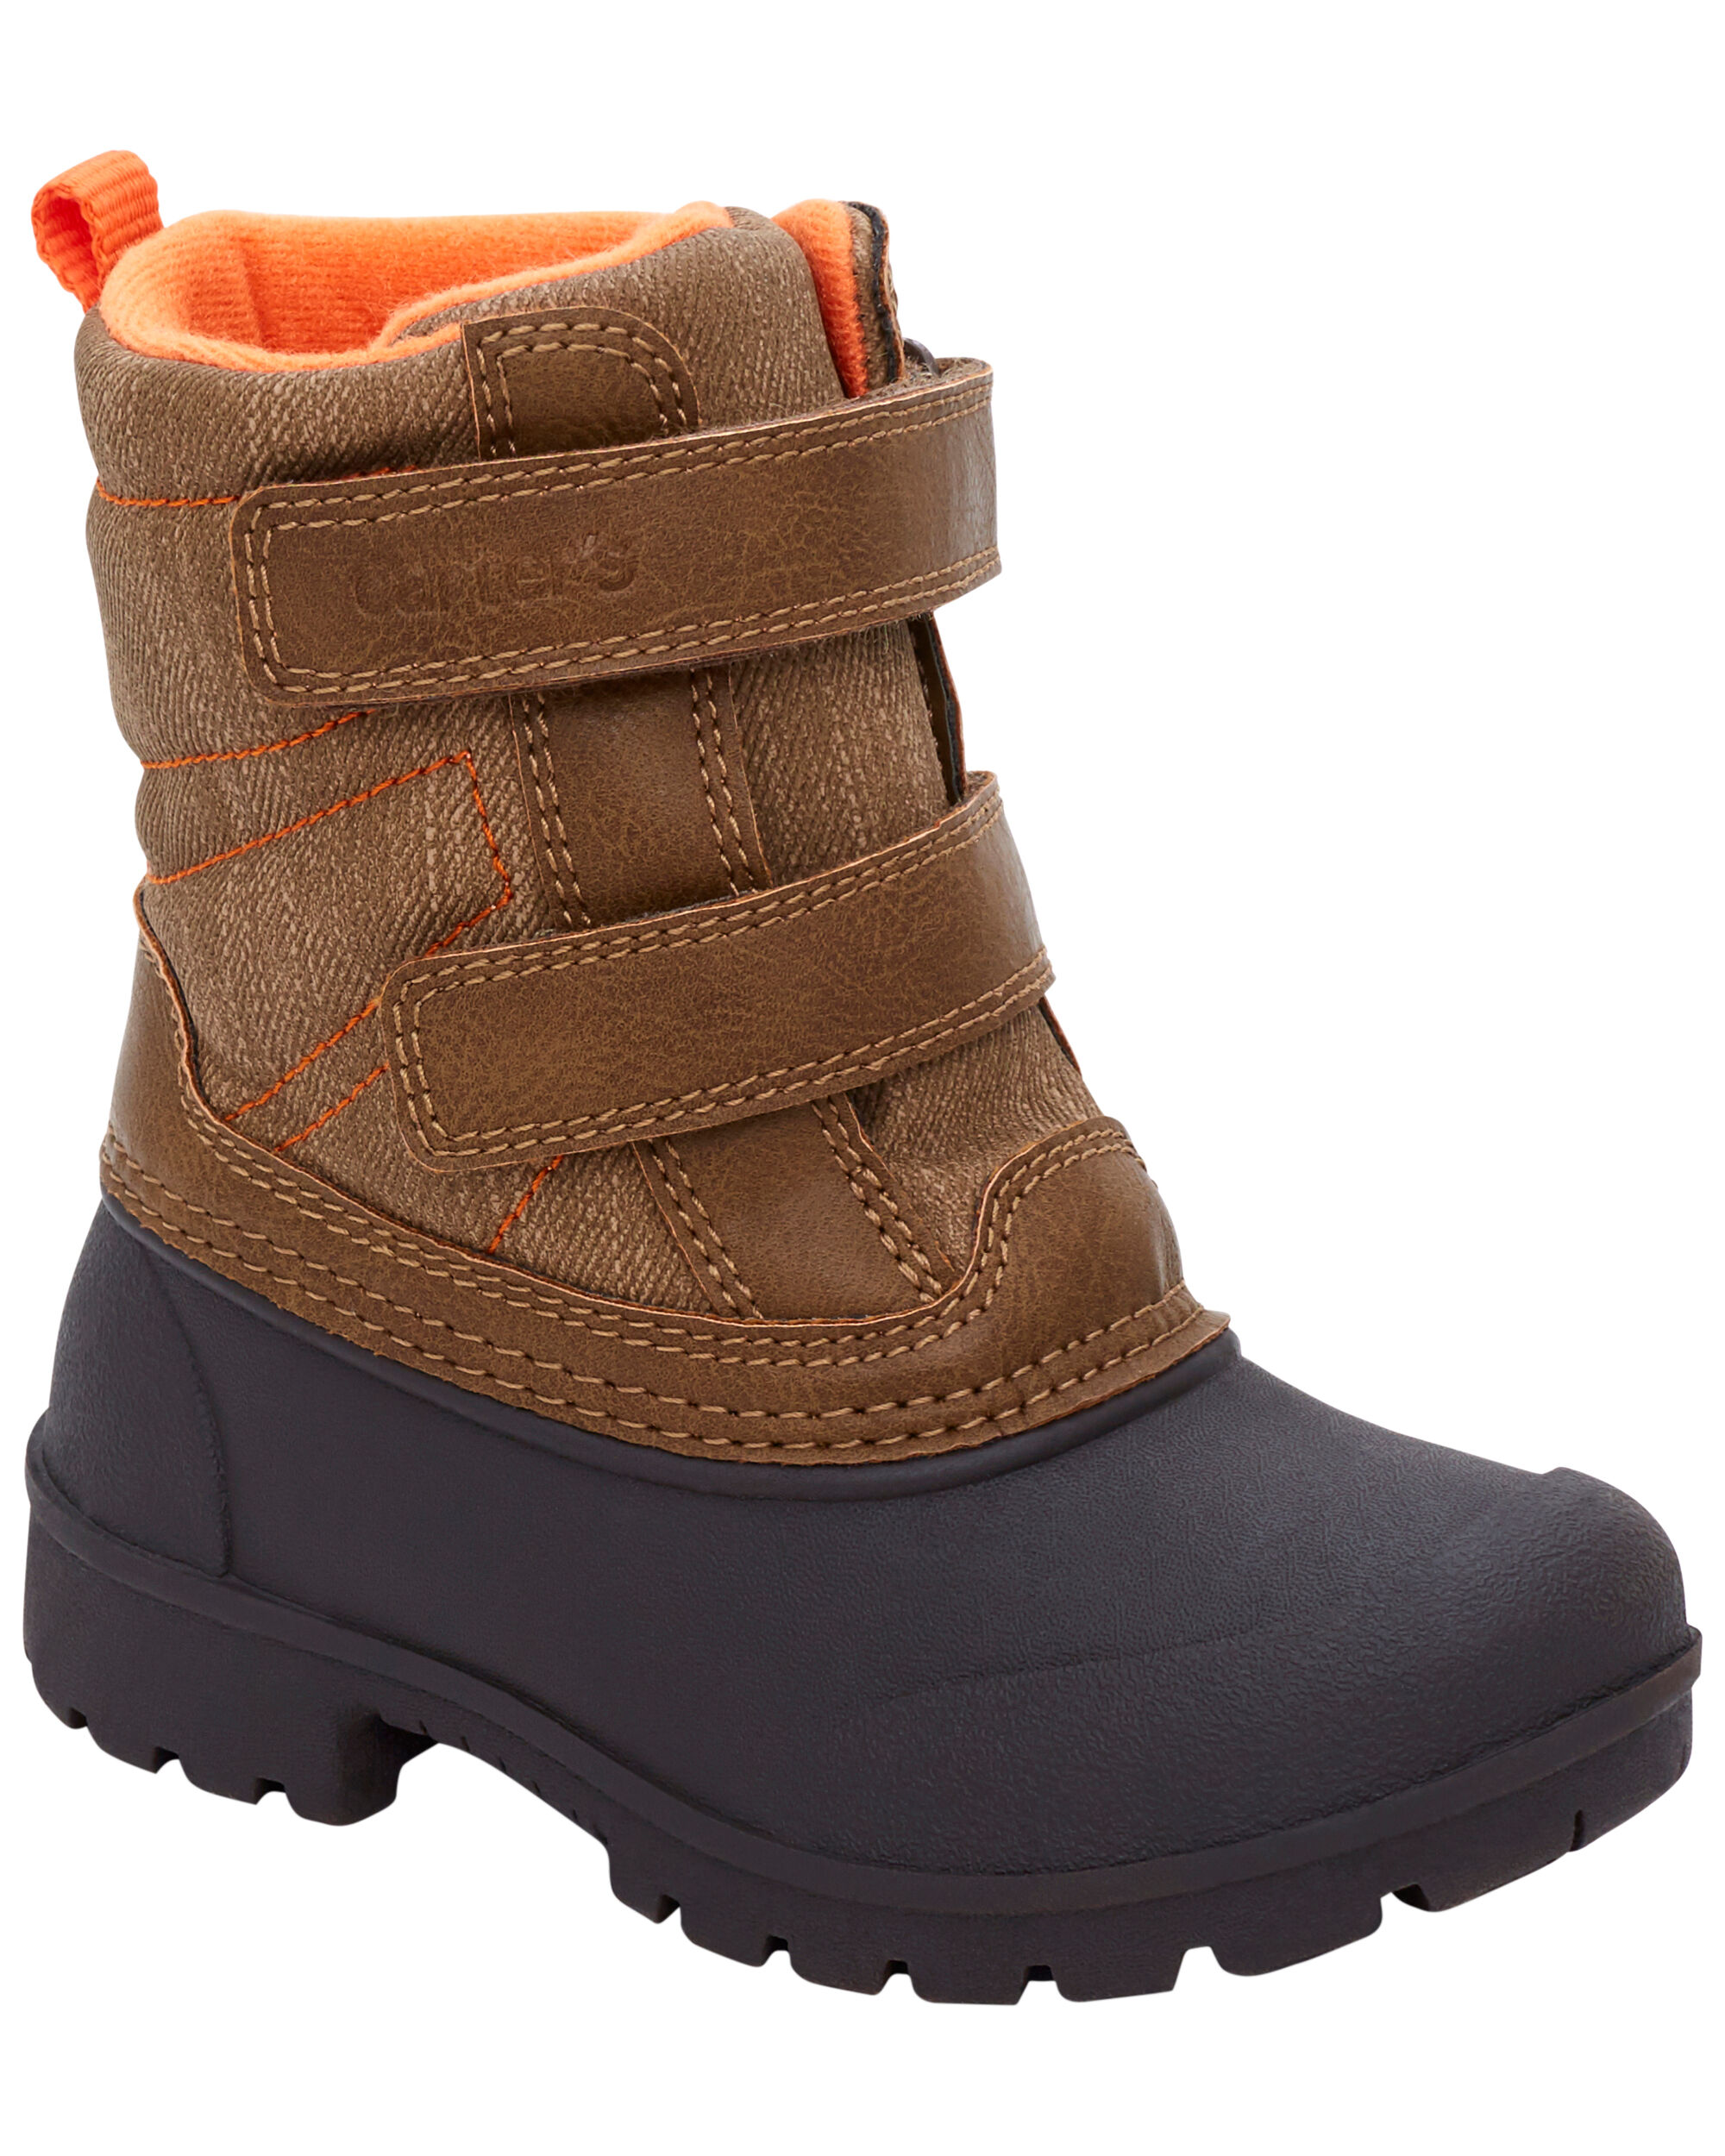 Kid Carters Snow Boots